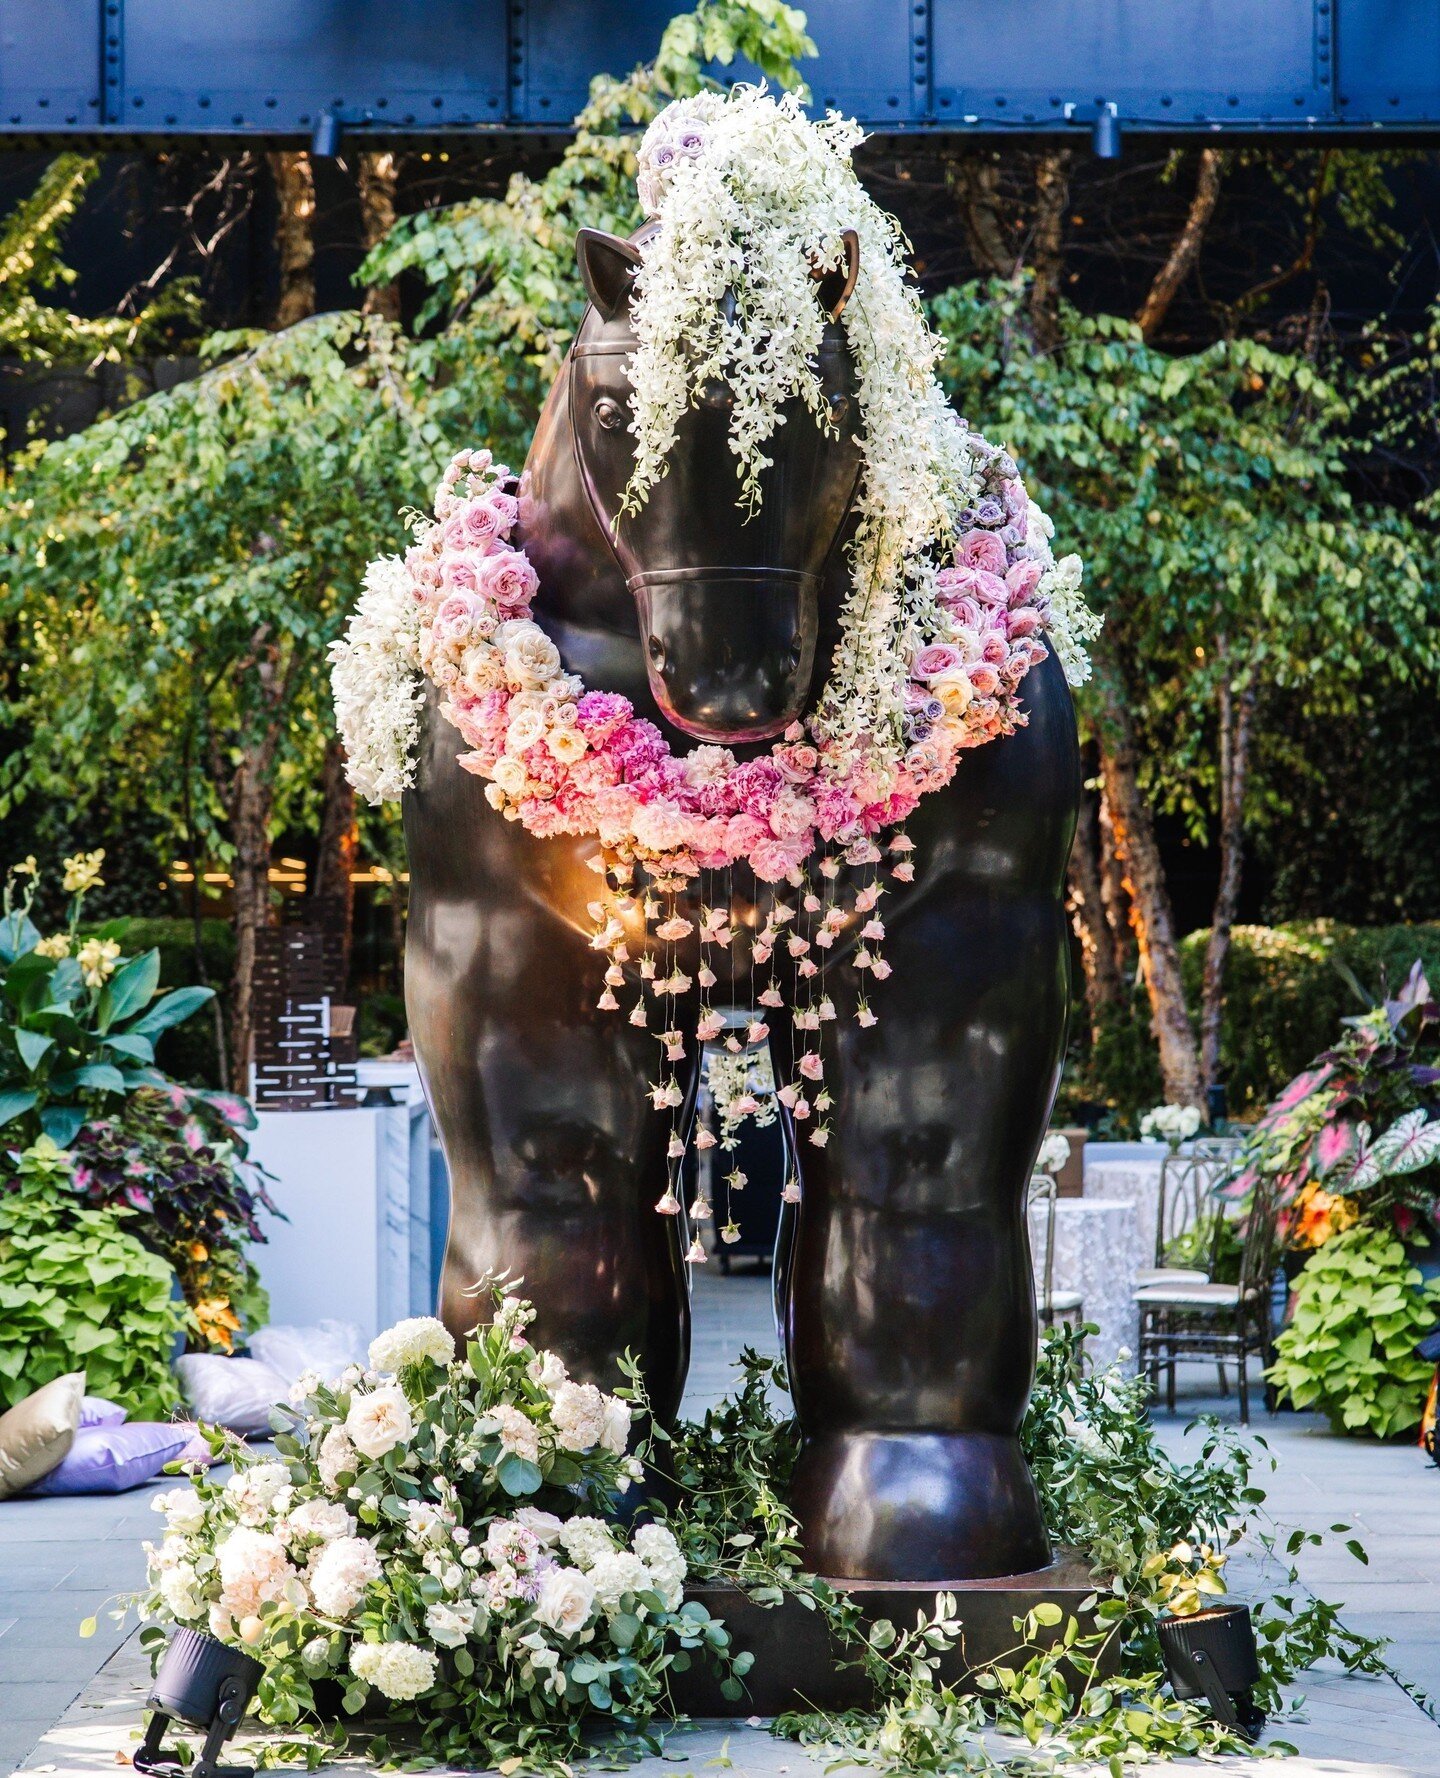 Mane n' Tail Shampoo's next sponsorship, perhaps? 🐴 E + K celebrated their engagement with a chic garden soiree in the courtyard at @sagamorependrybaltimore⁠. We had the chance to be @botero_artist's Horse's stylists for the evening, and side-swept 